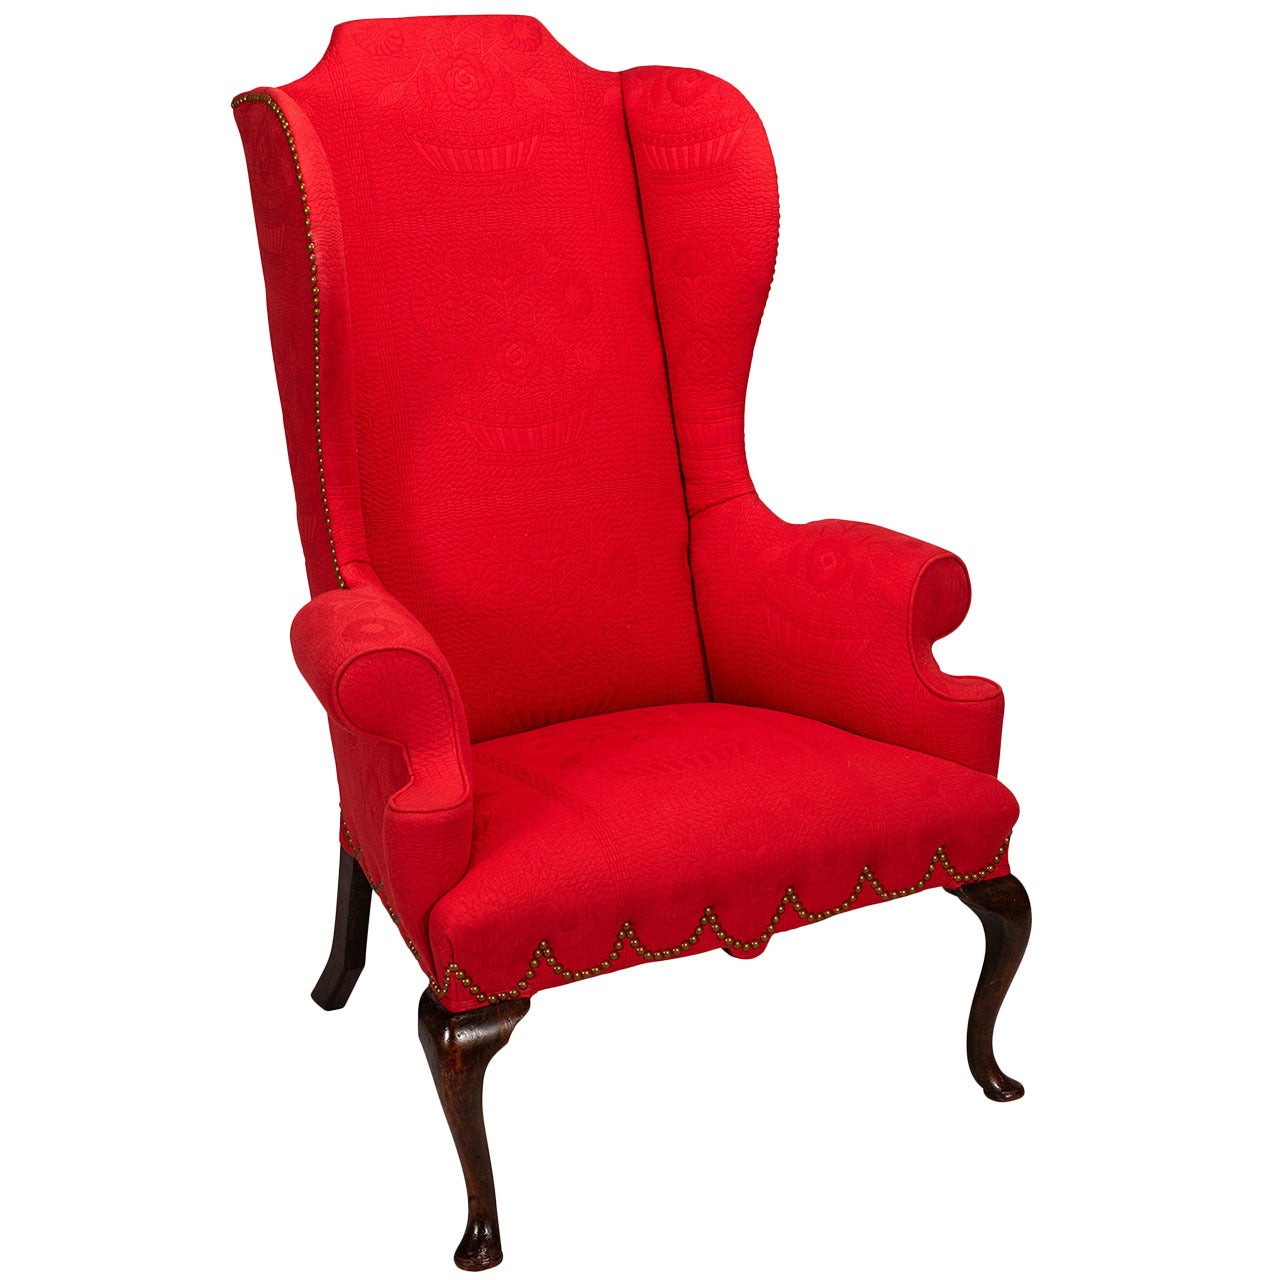 George II Style High Back Wing Chair